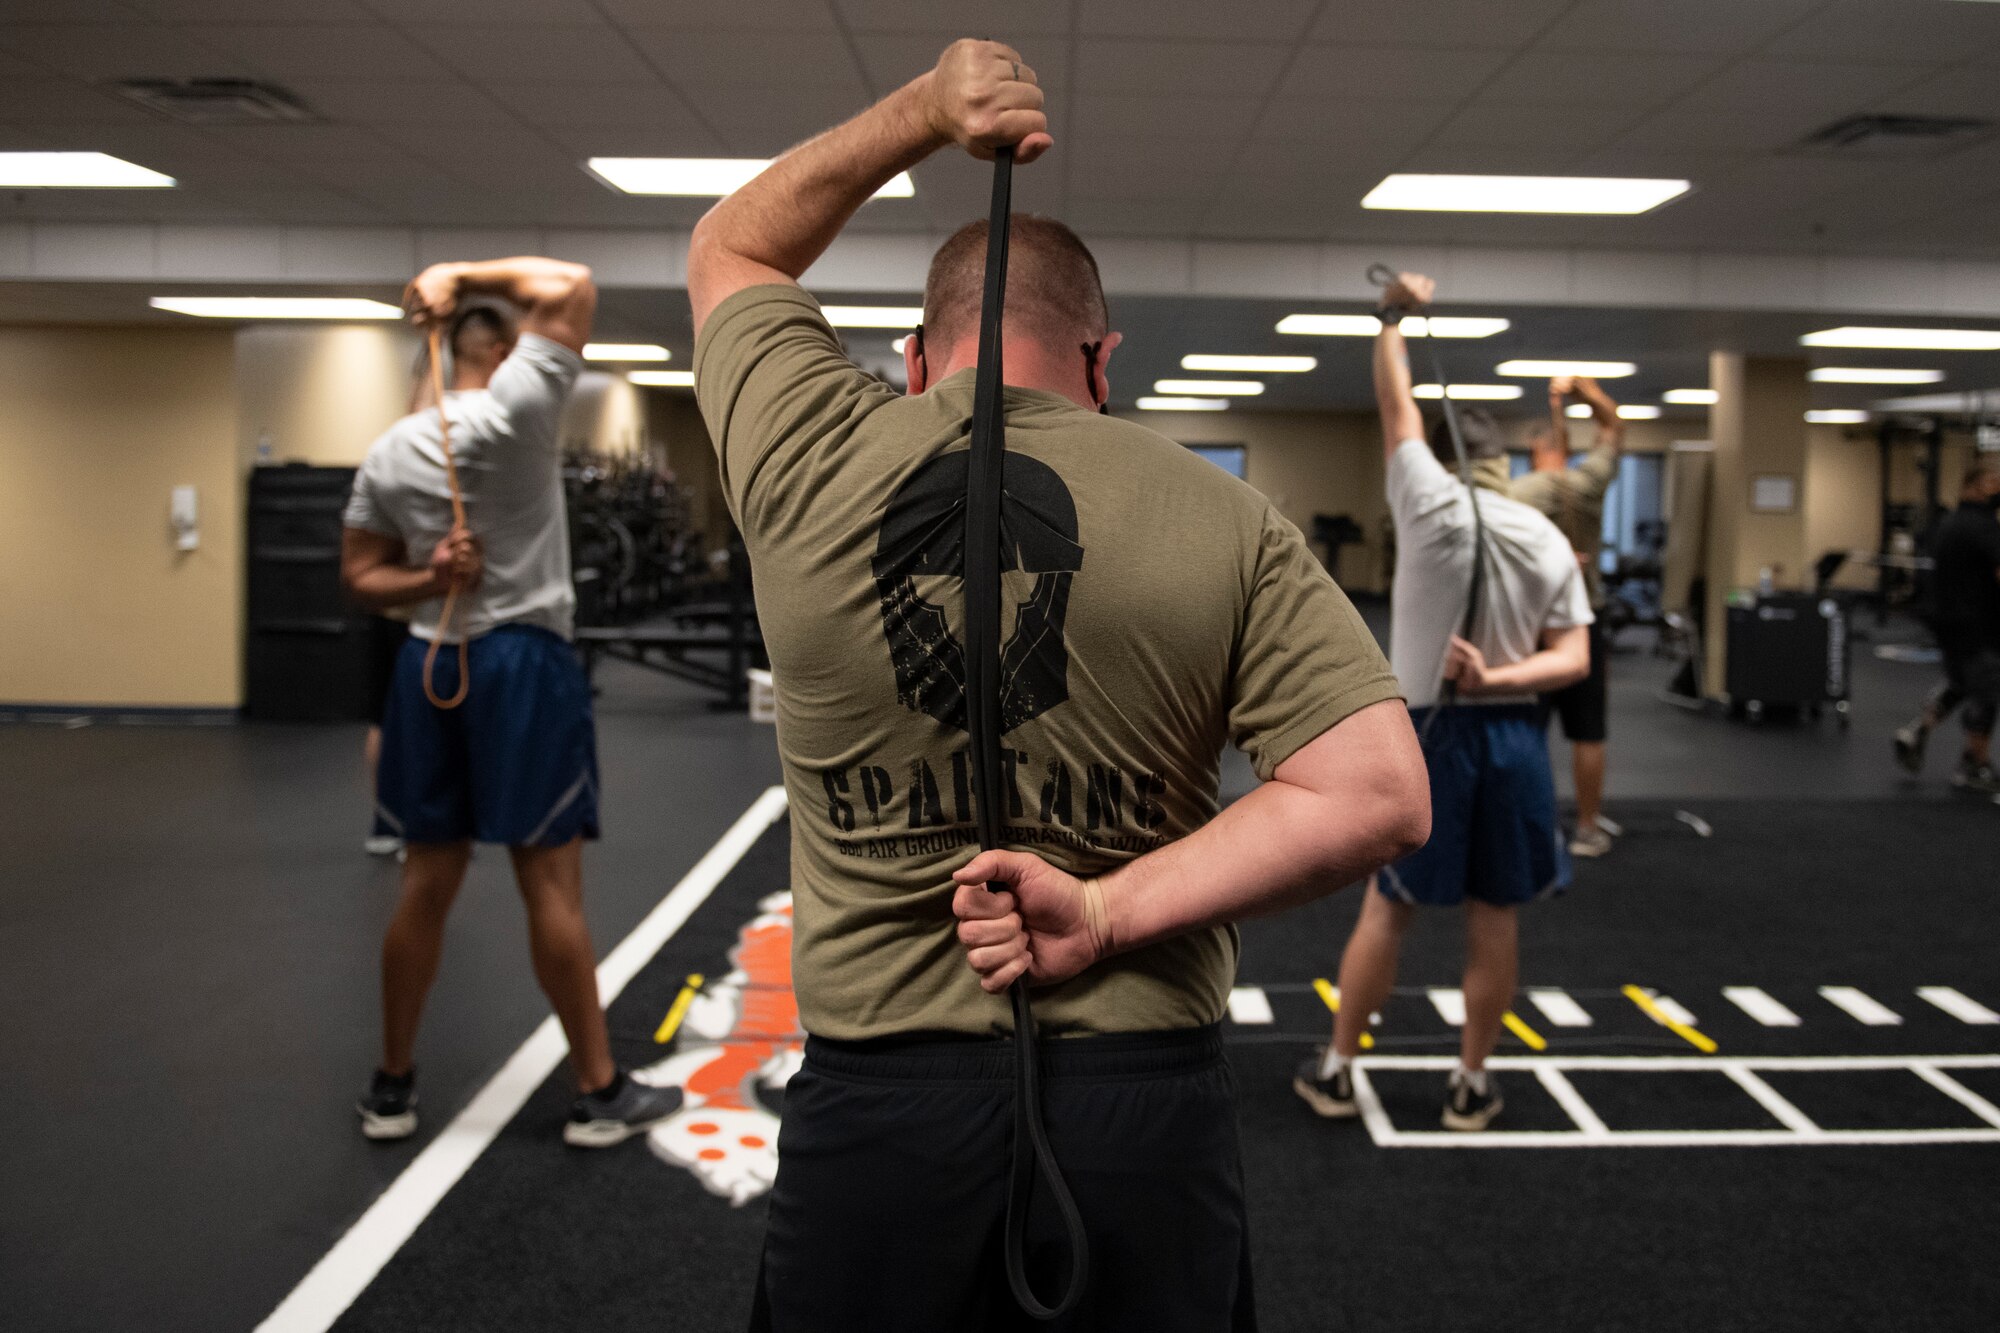 A photo of Chief Master Sgt. Wade using an exercise band stretched behind his back.